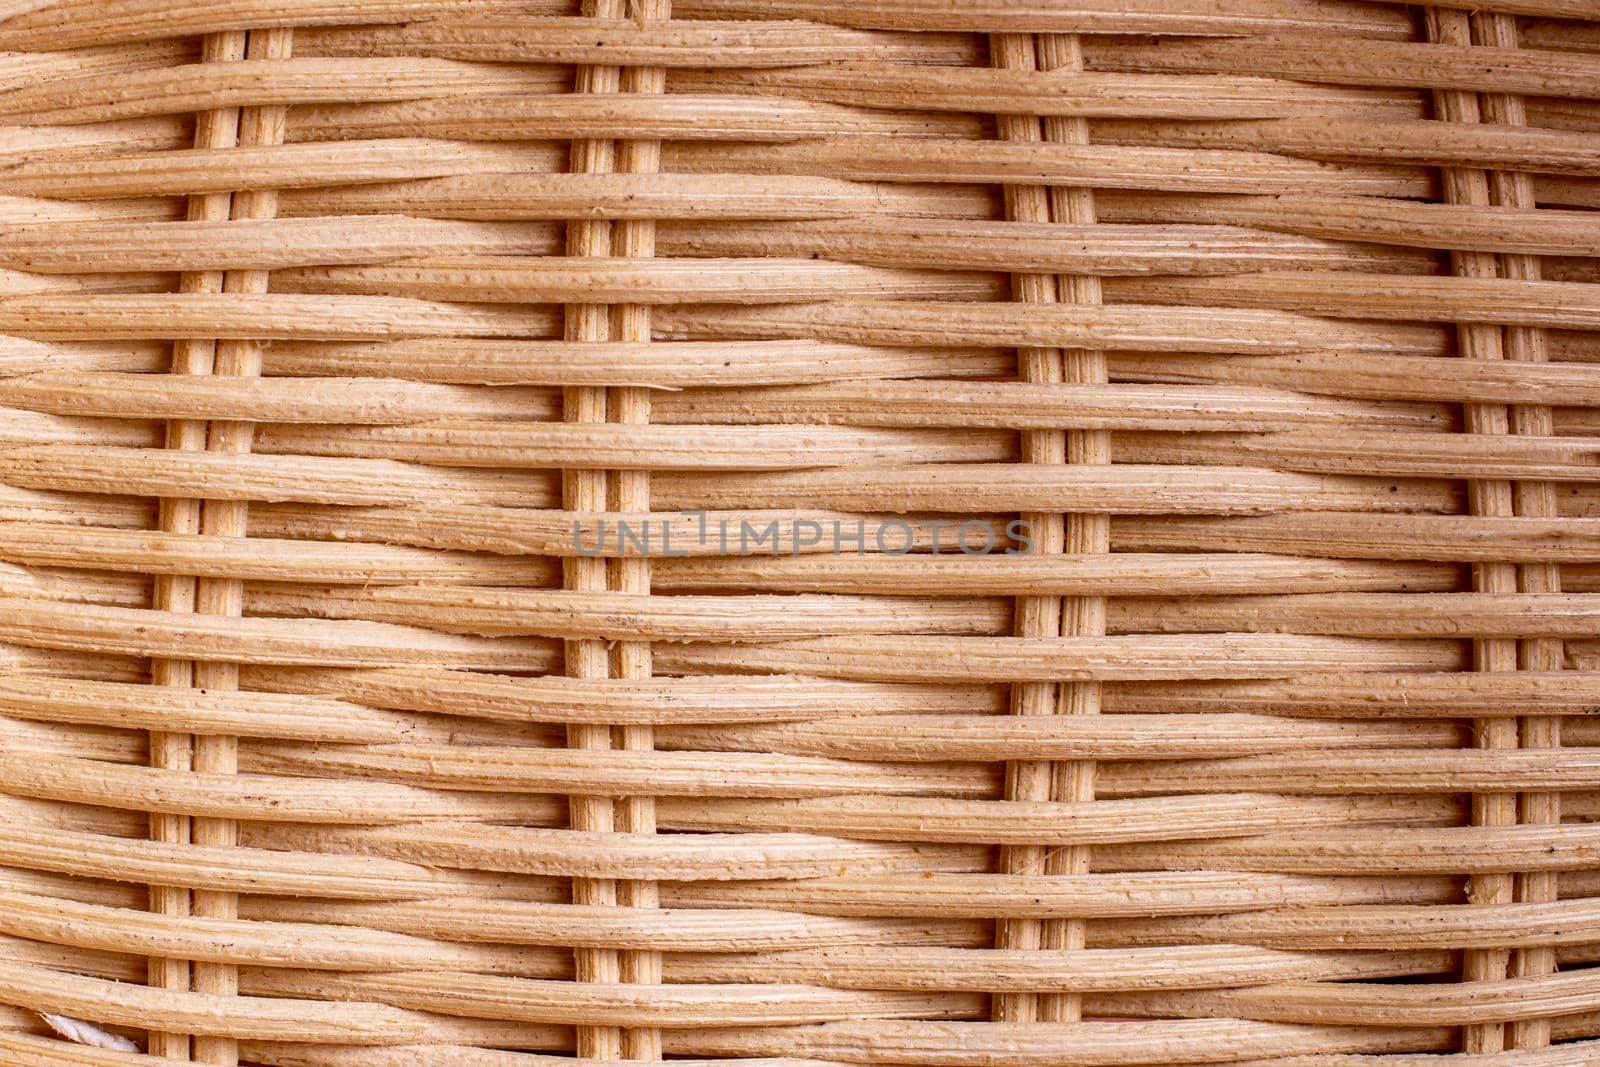 hand-woven wave weave texture. weaving of wooden rods. close-up